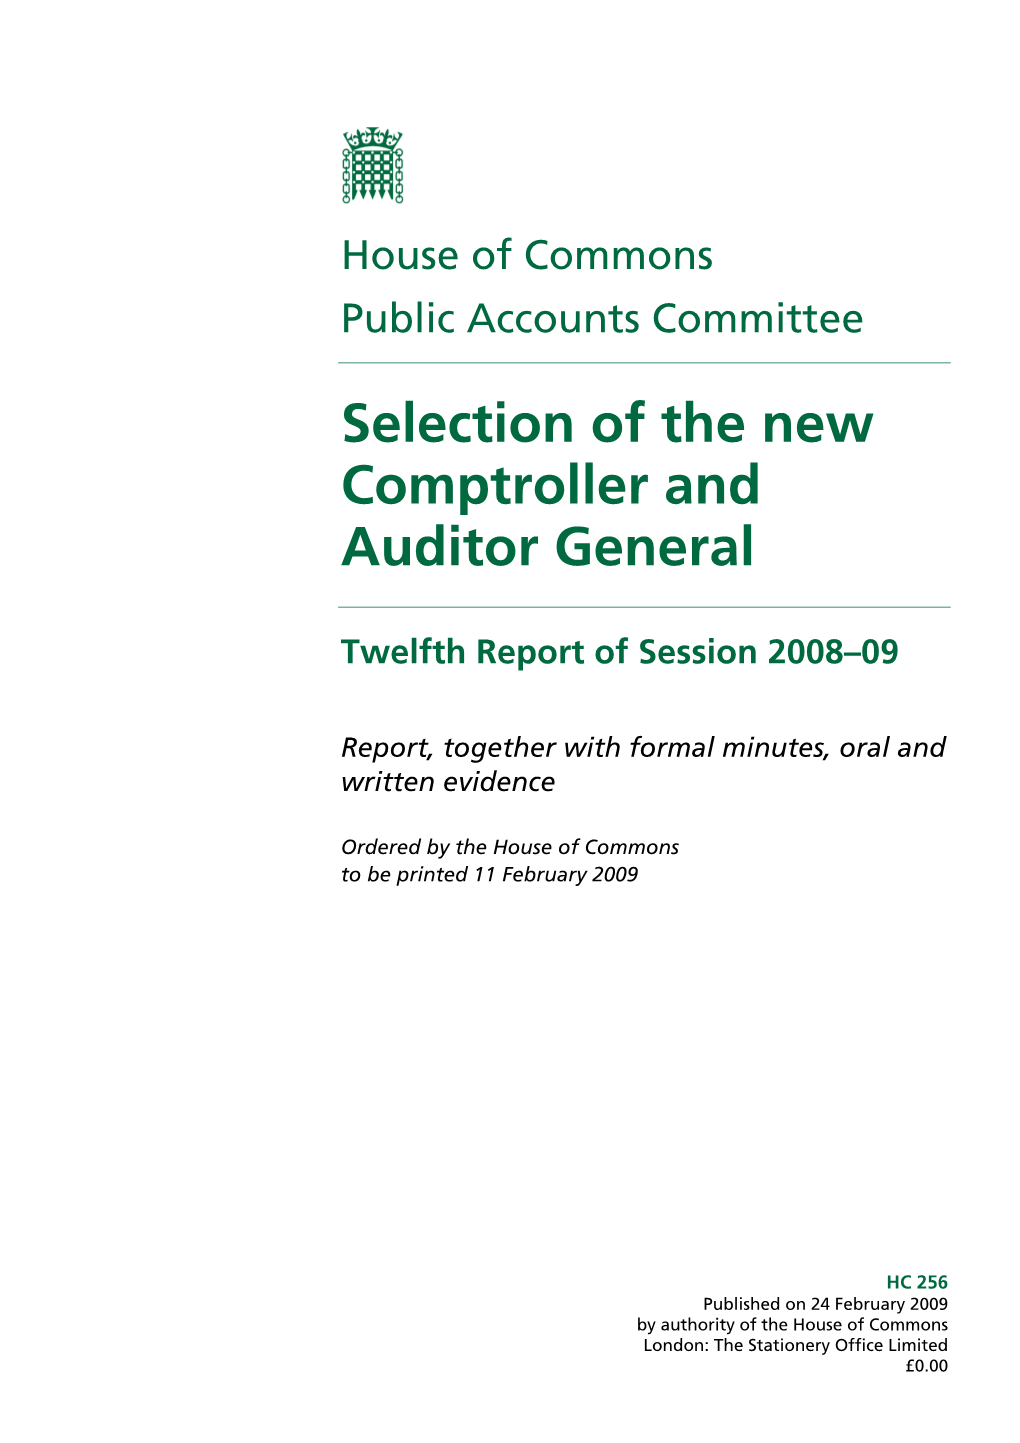 Selection of the New Comptroller and Auditor General